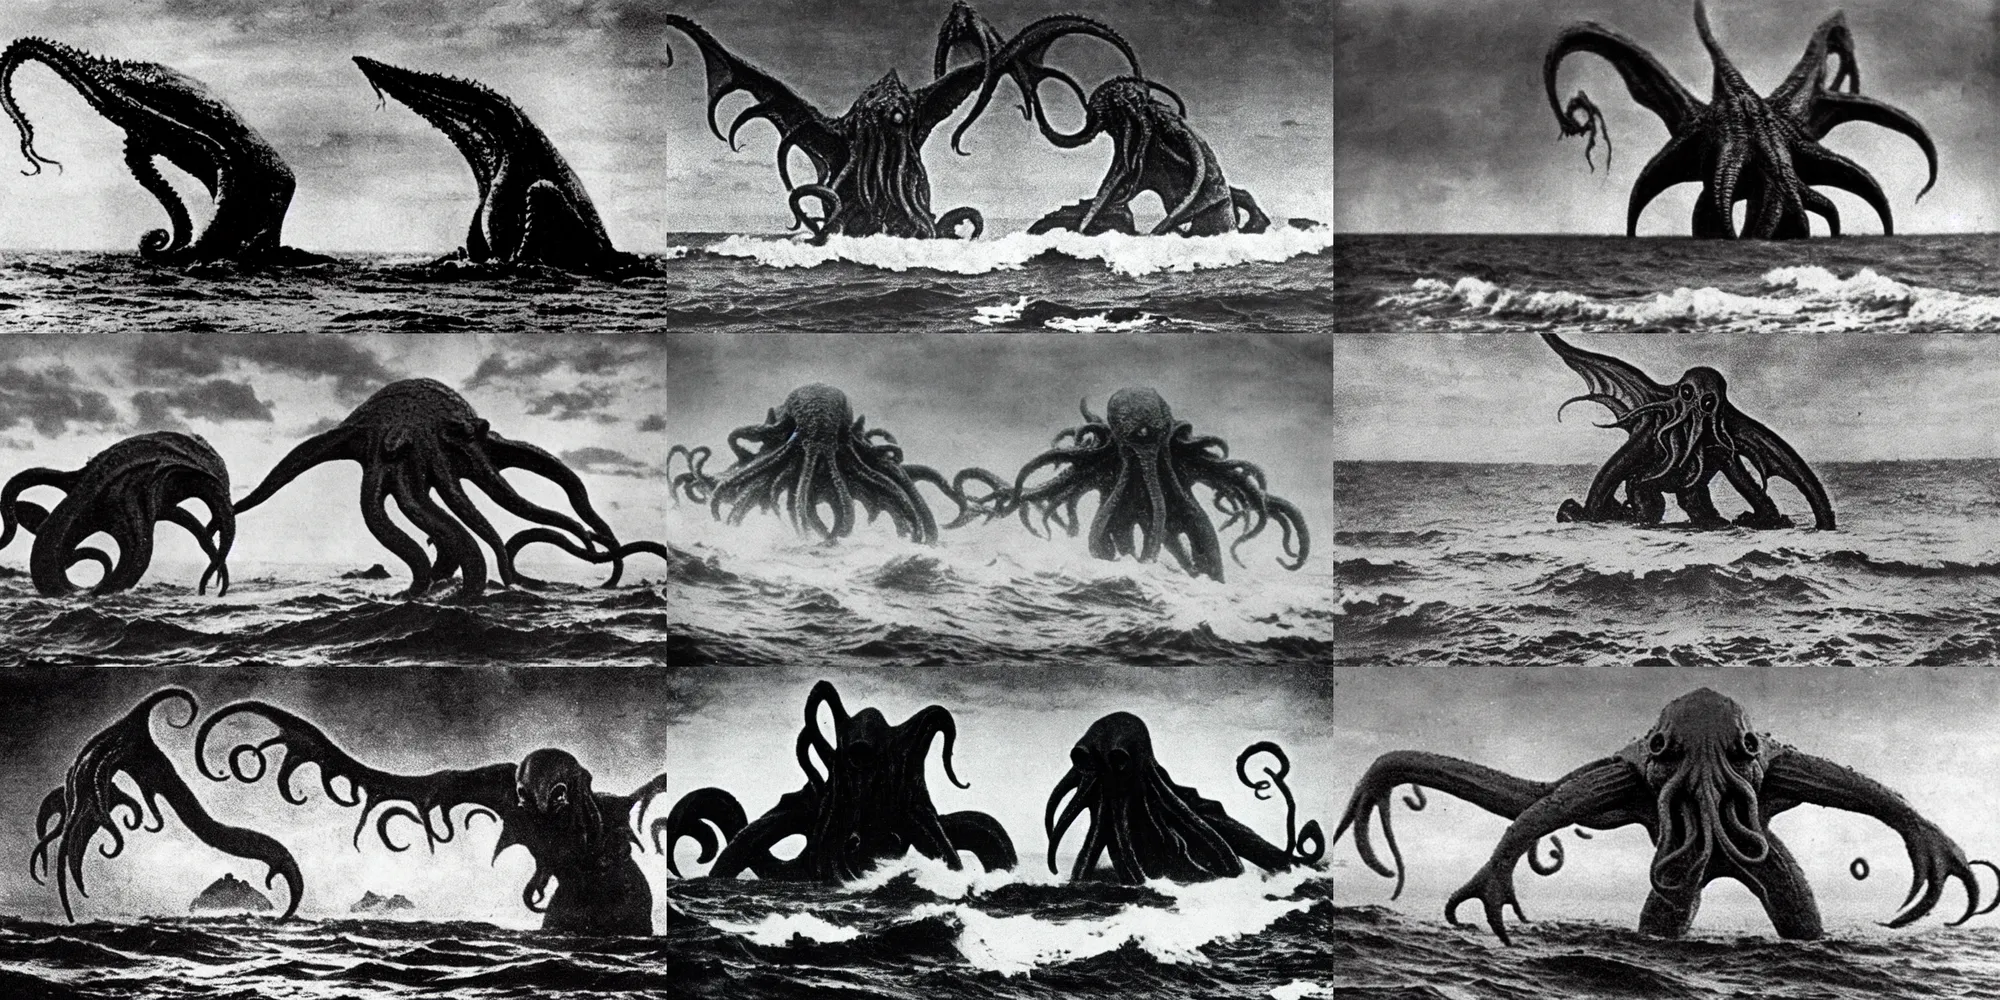 Prompt: grainy photo from the 1 9 3 0 s of cthulhu emerging from the ocean, taken from the shore, epic, dramatic